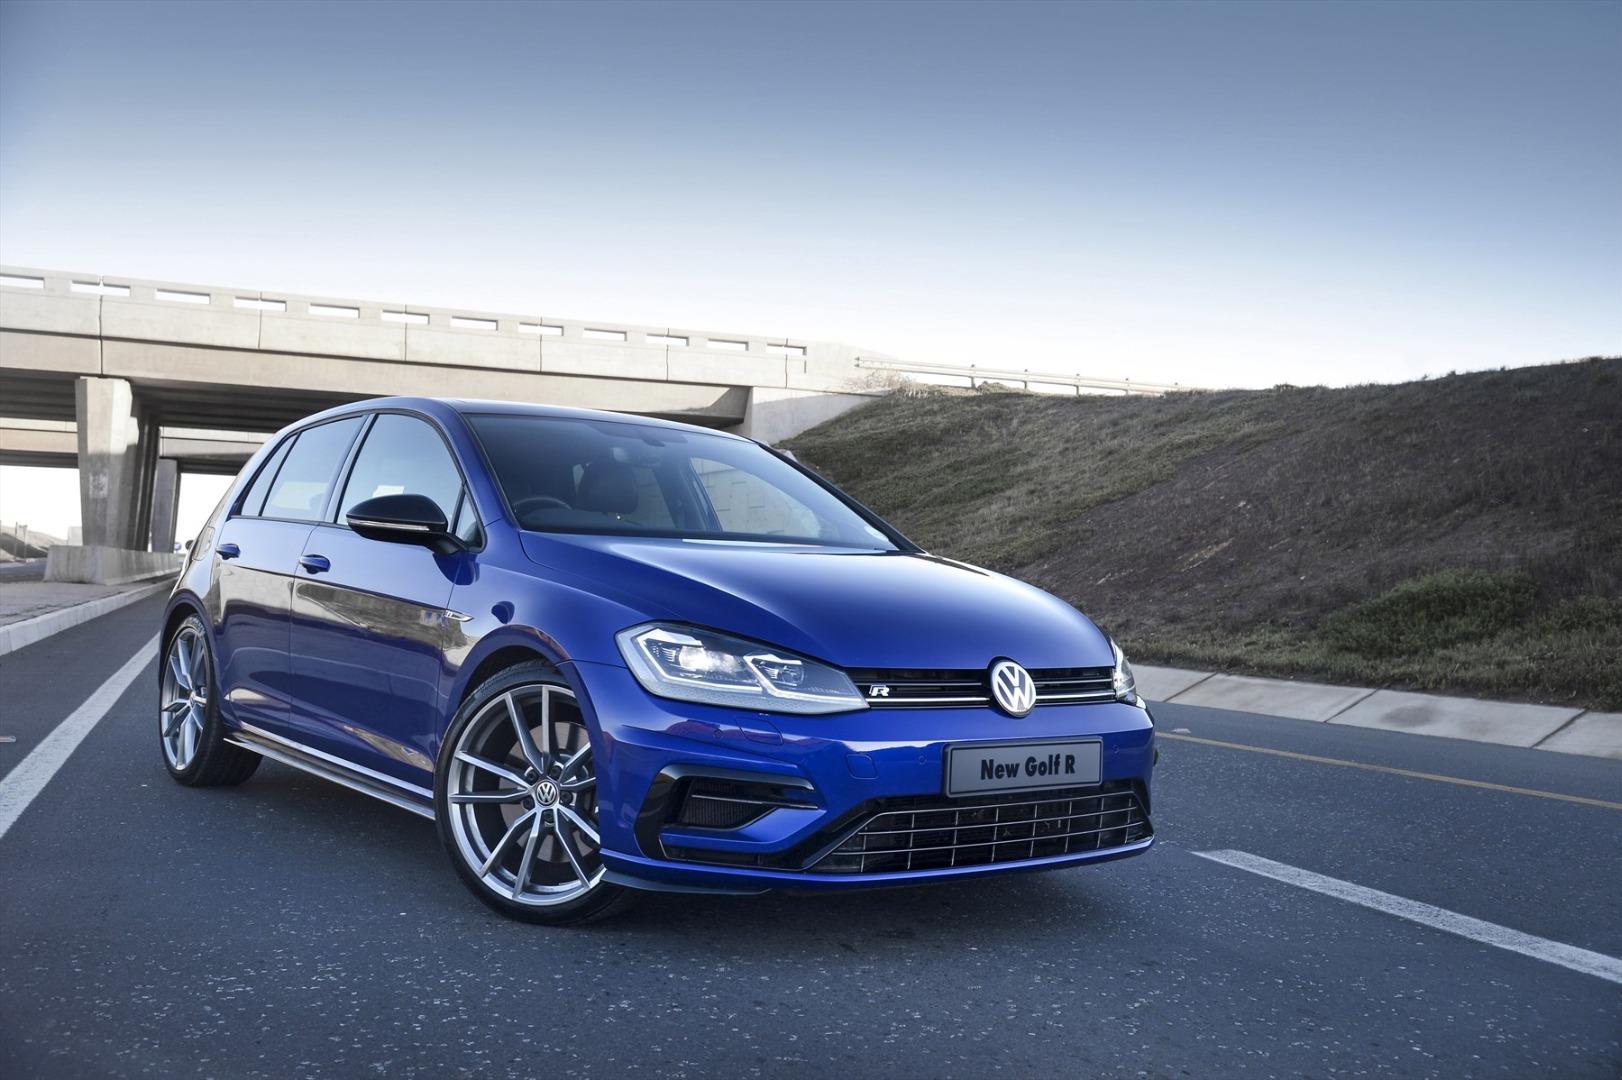 New Used Volkswagen Golf R - Buying a Car - AutoTrader